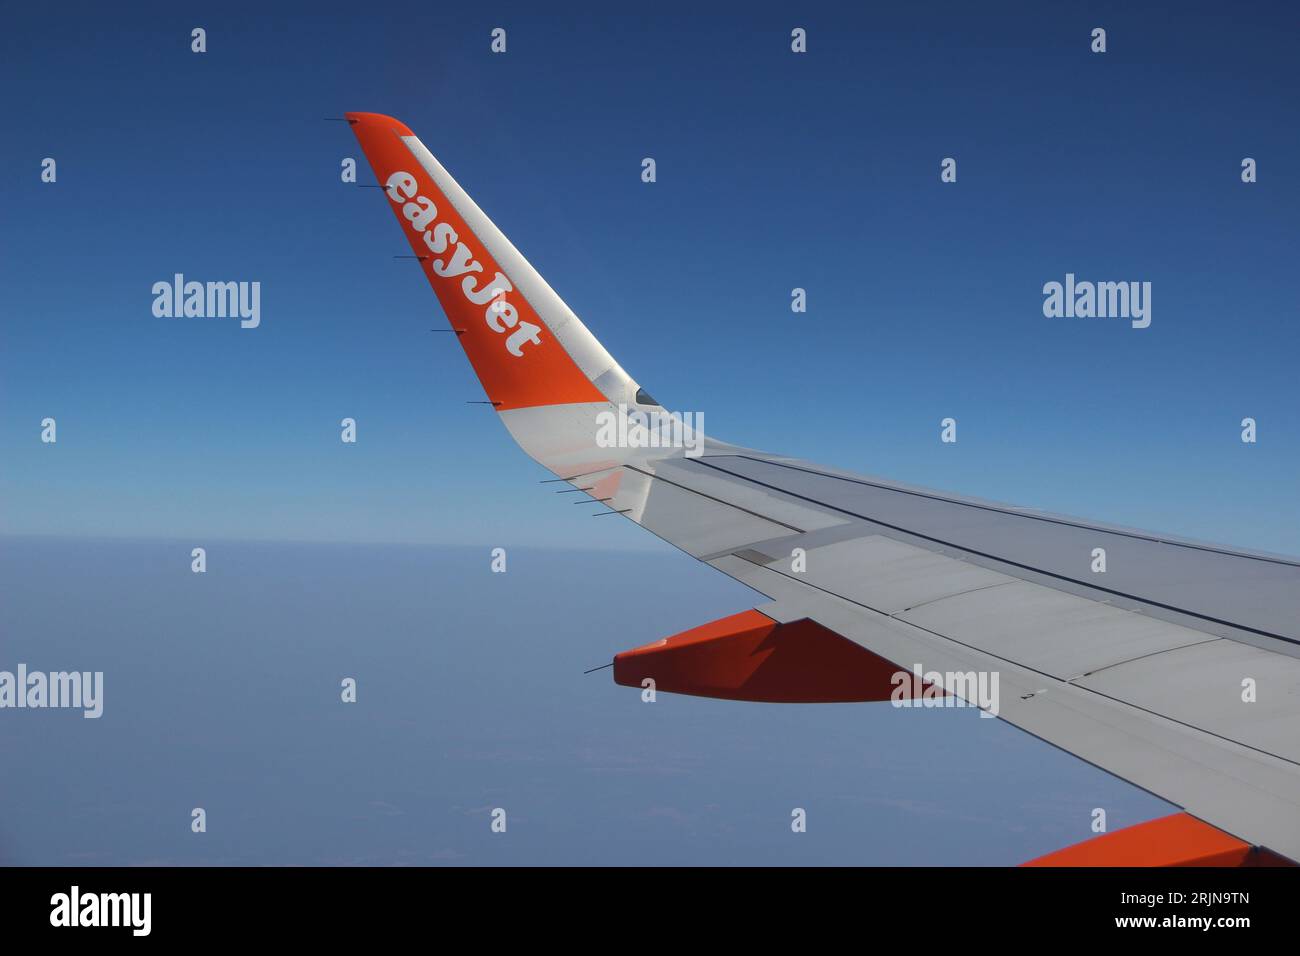 The winglet of an Easyjet airplane against the background of a blue sky. Stock Photo